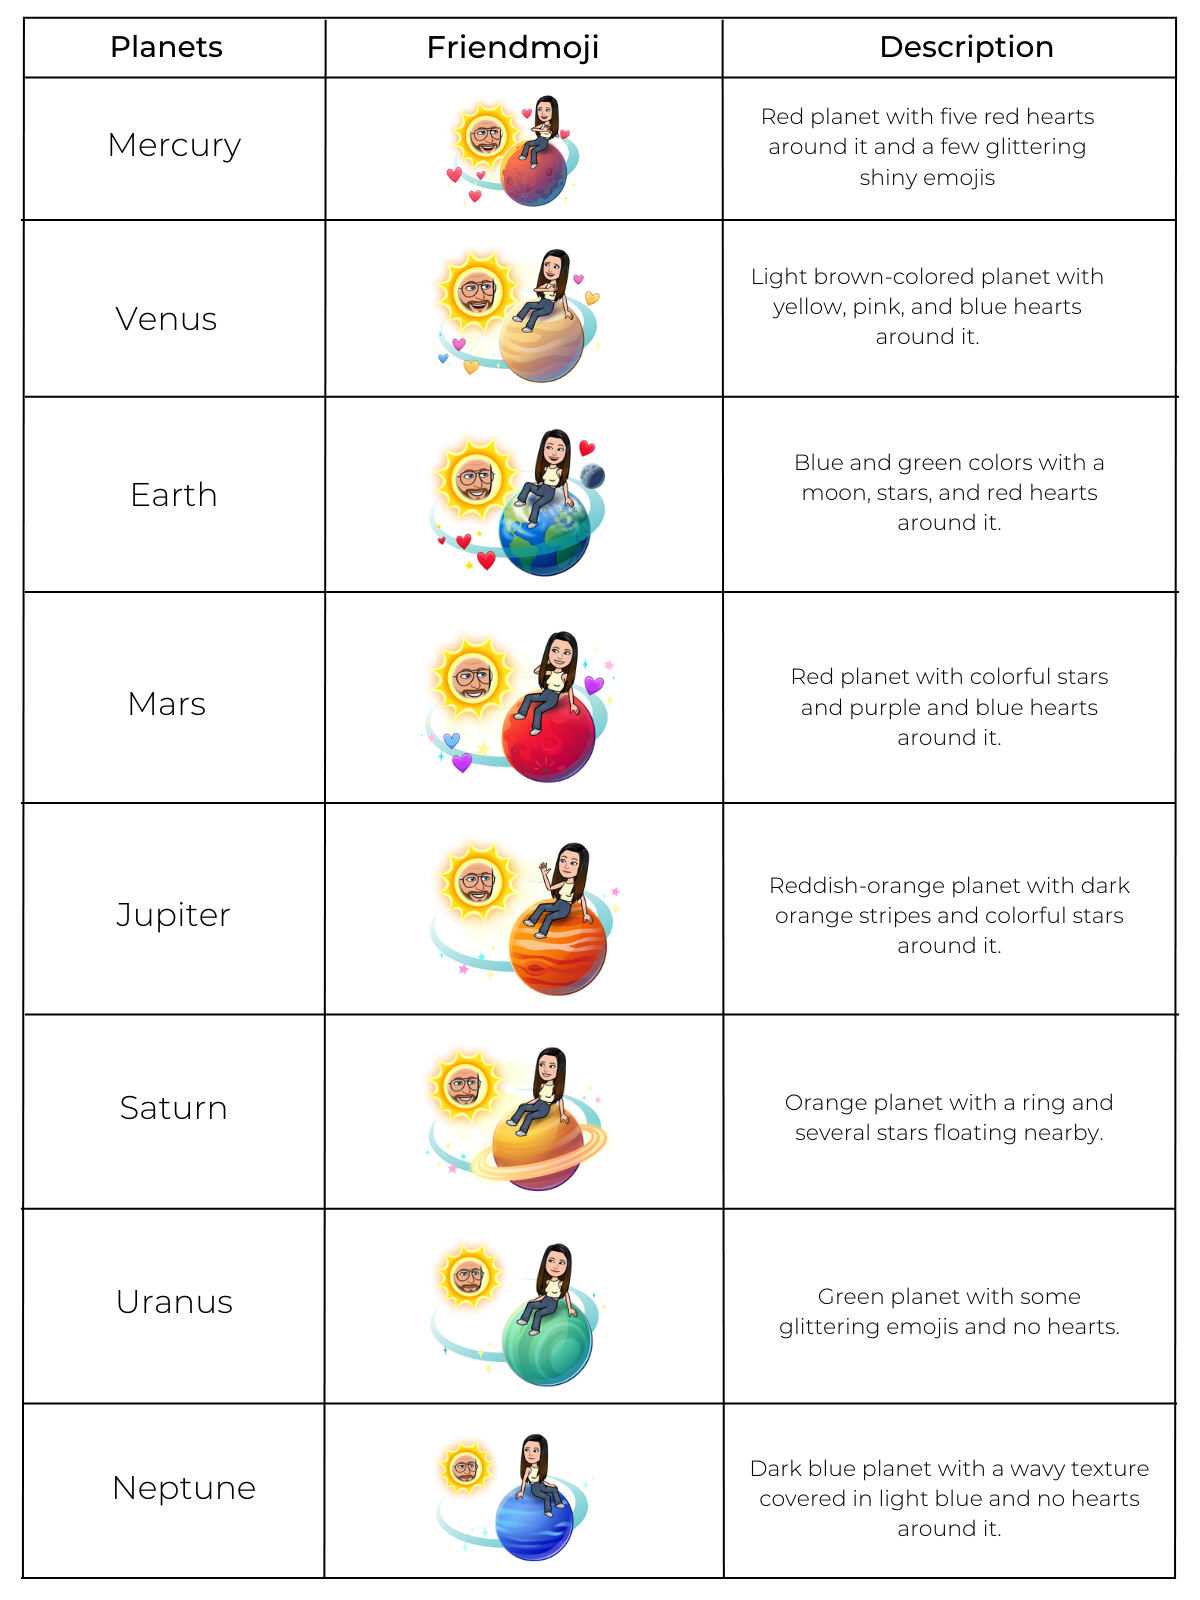 List of Snapchat Planets with name